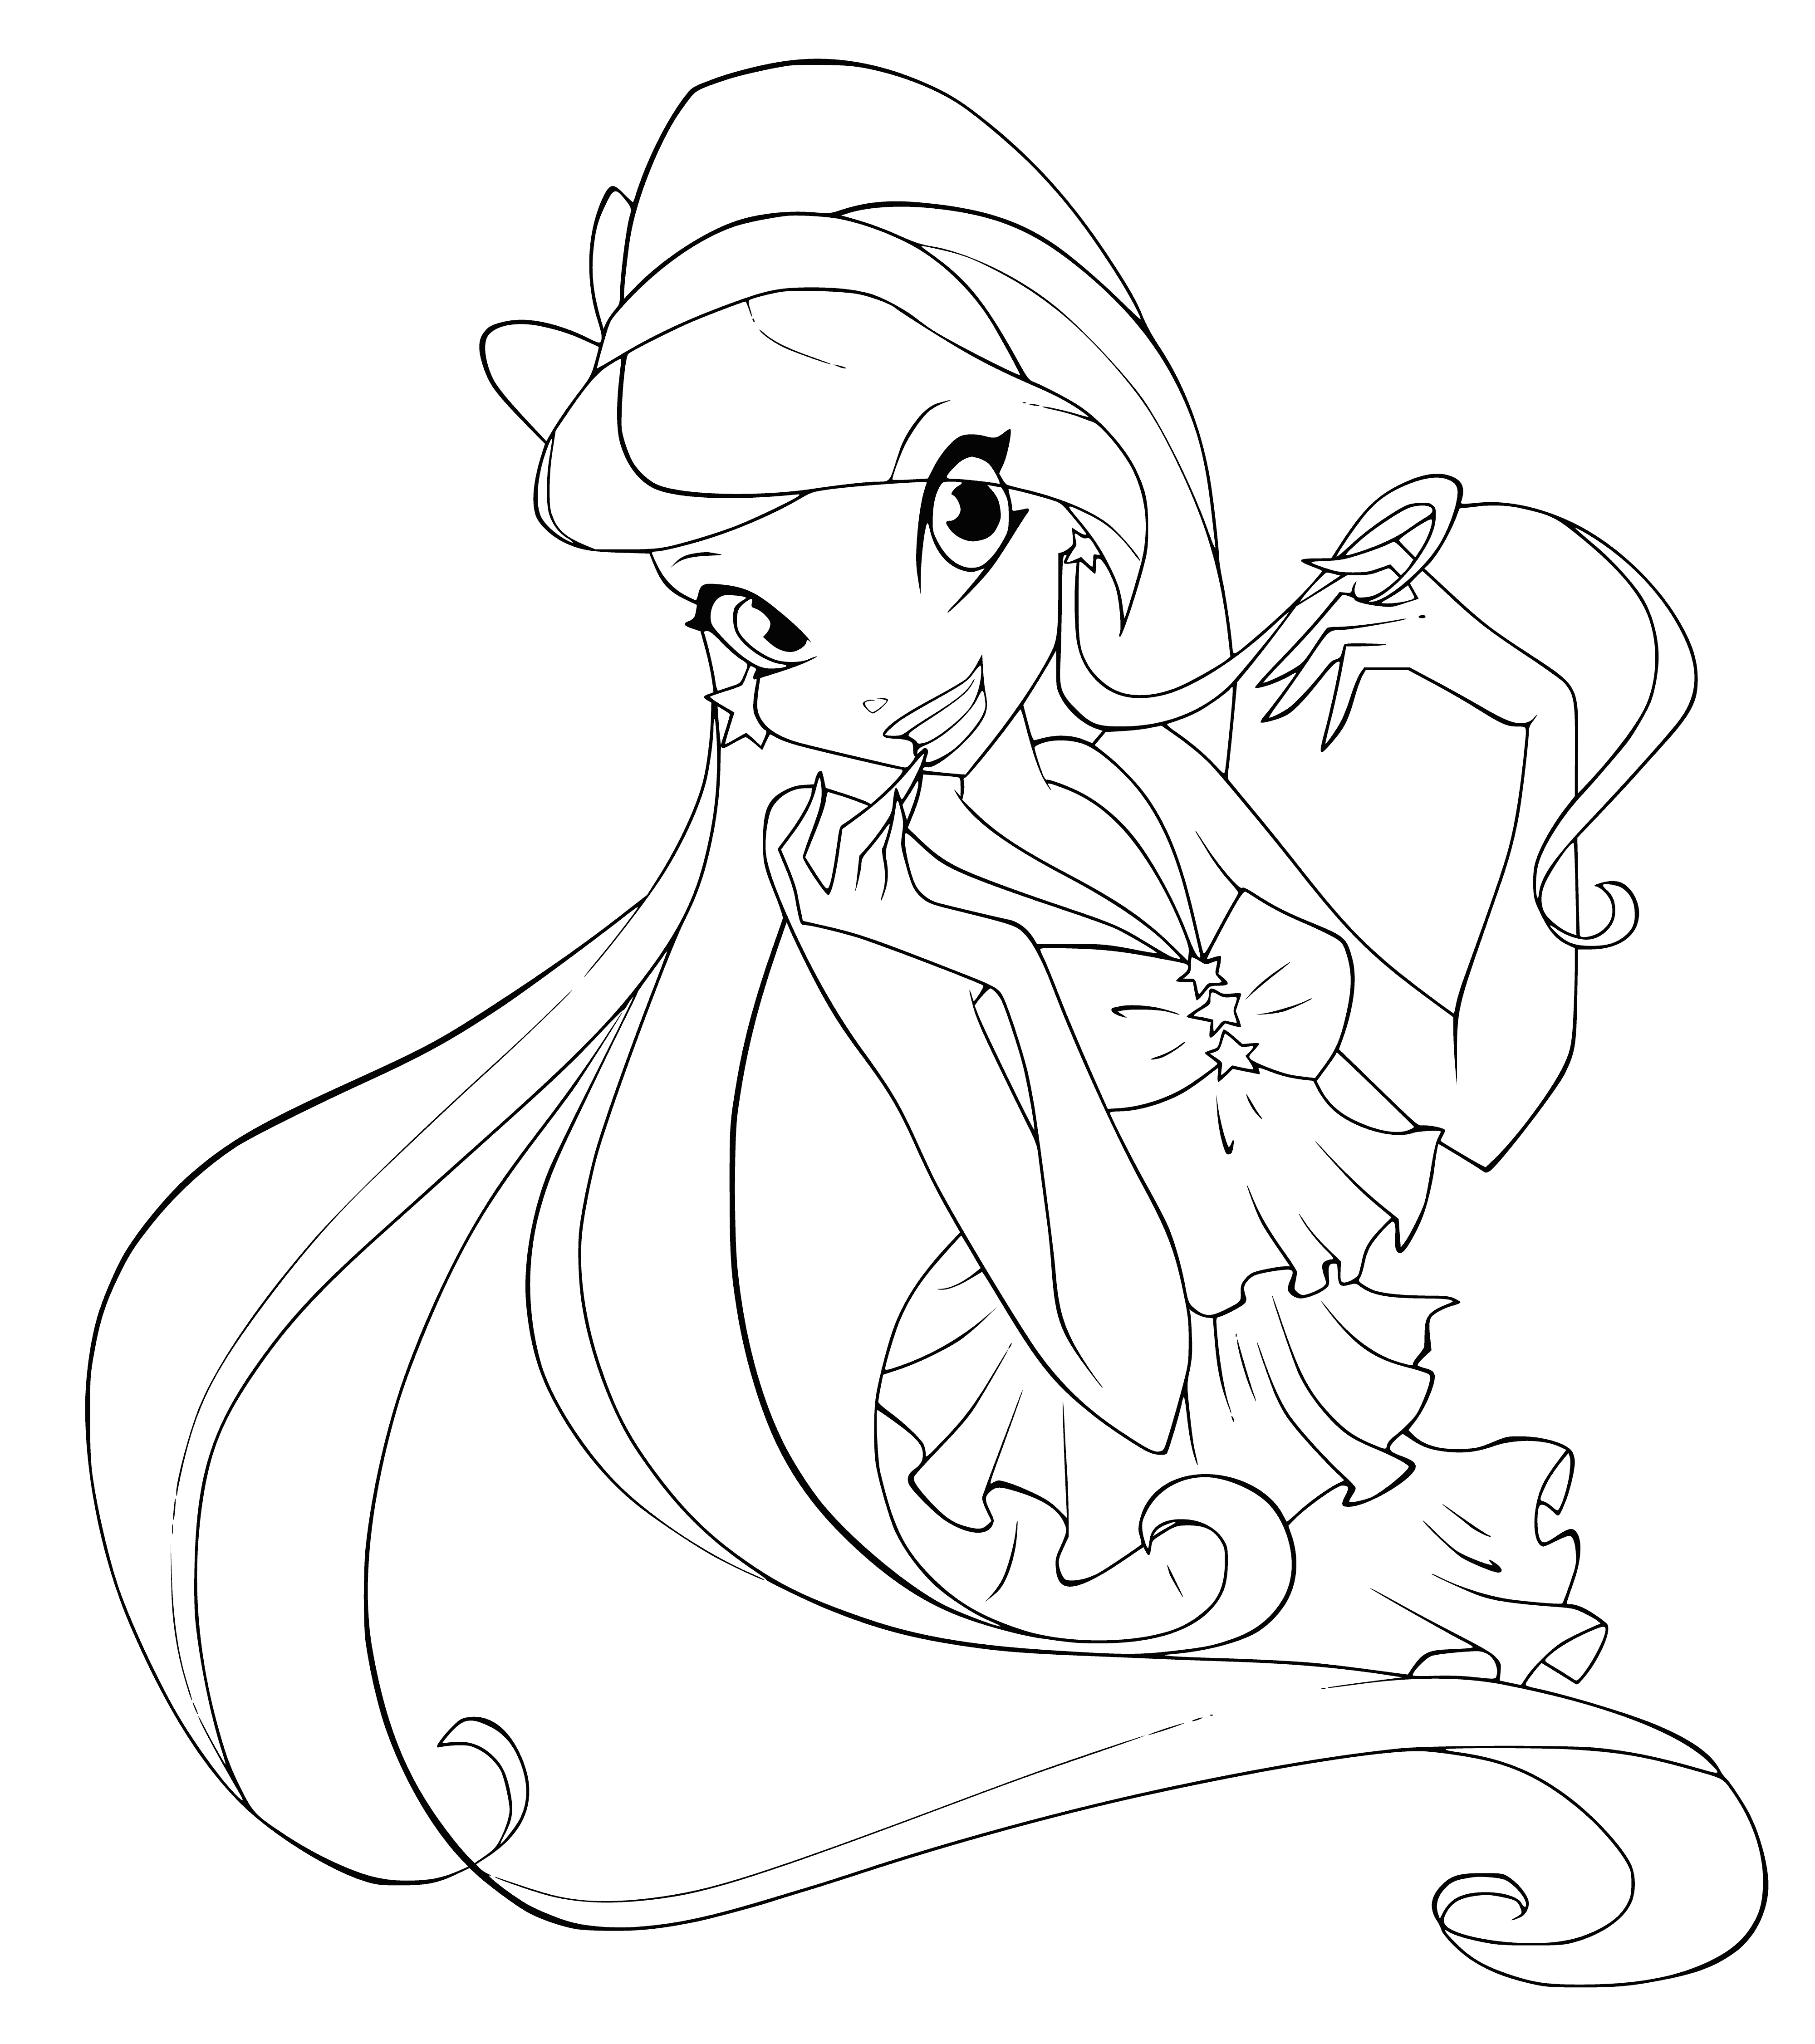 coloring page: Young woman looks at camera wearing light blue sweater, small smile on her face.